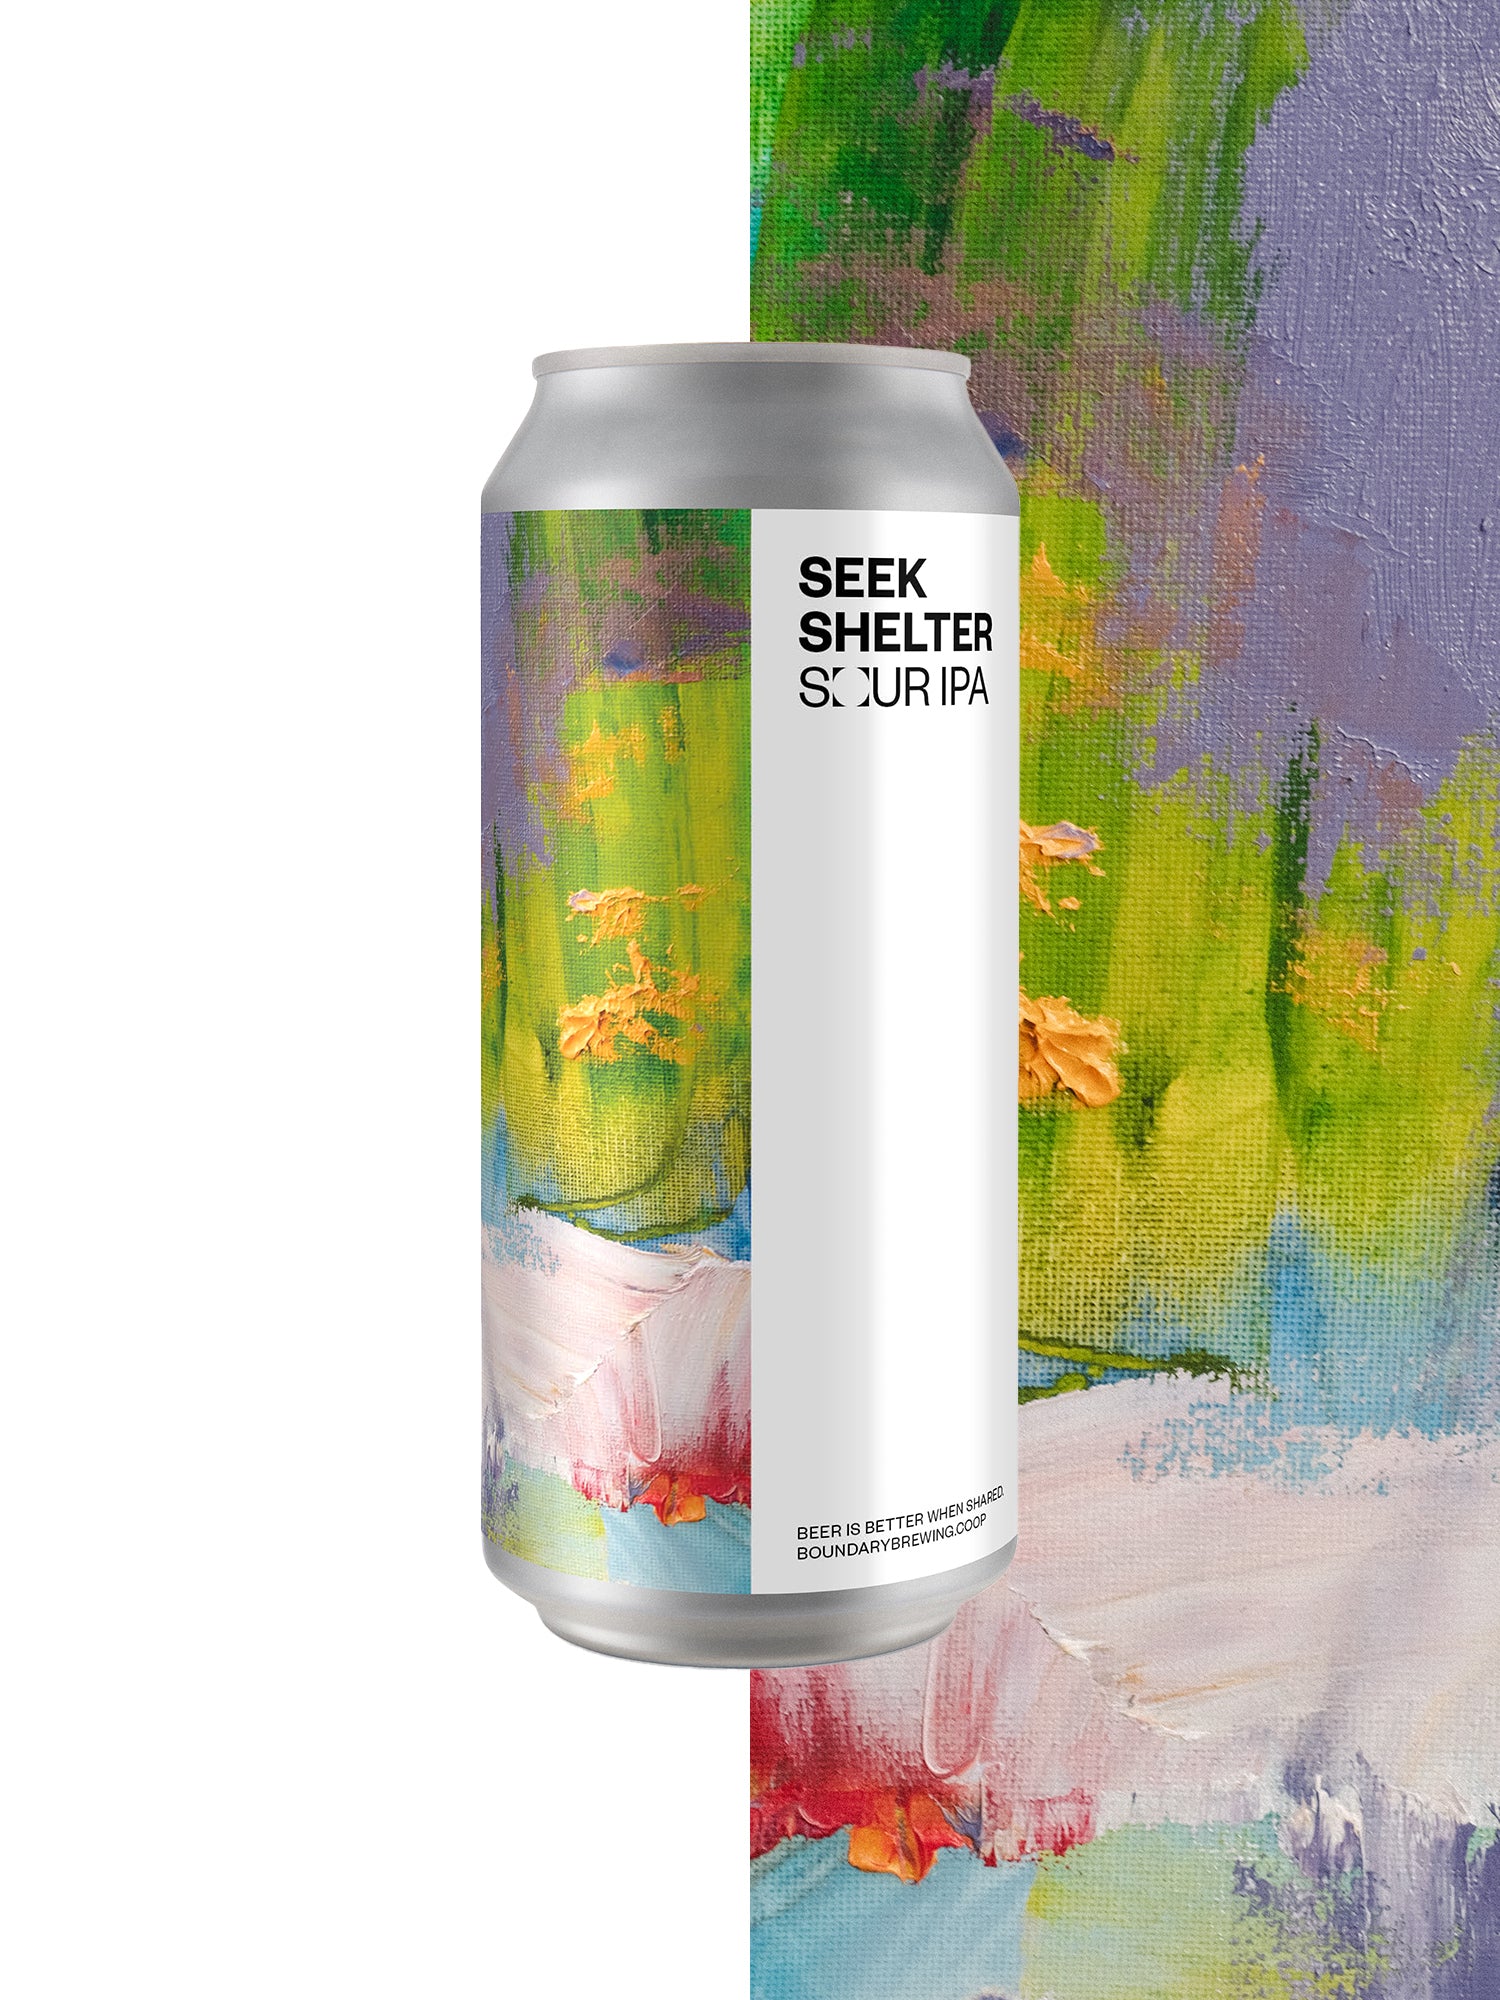 SEEK SHELTER Sour IPA (4-pack) 6%